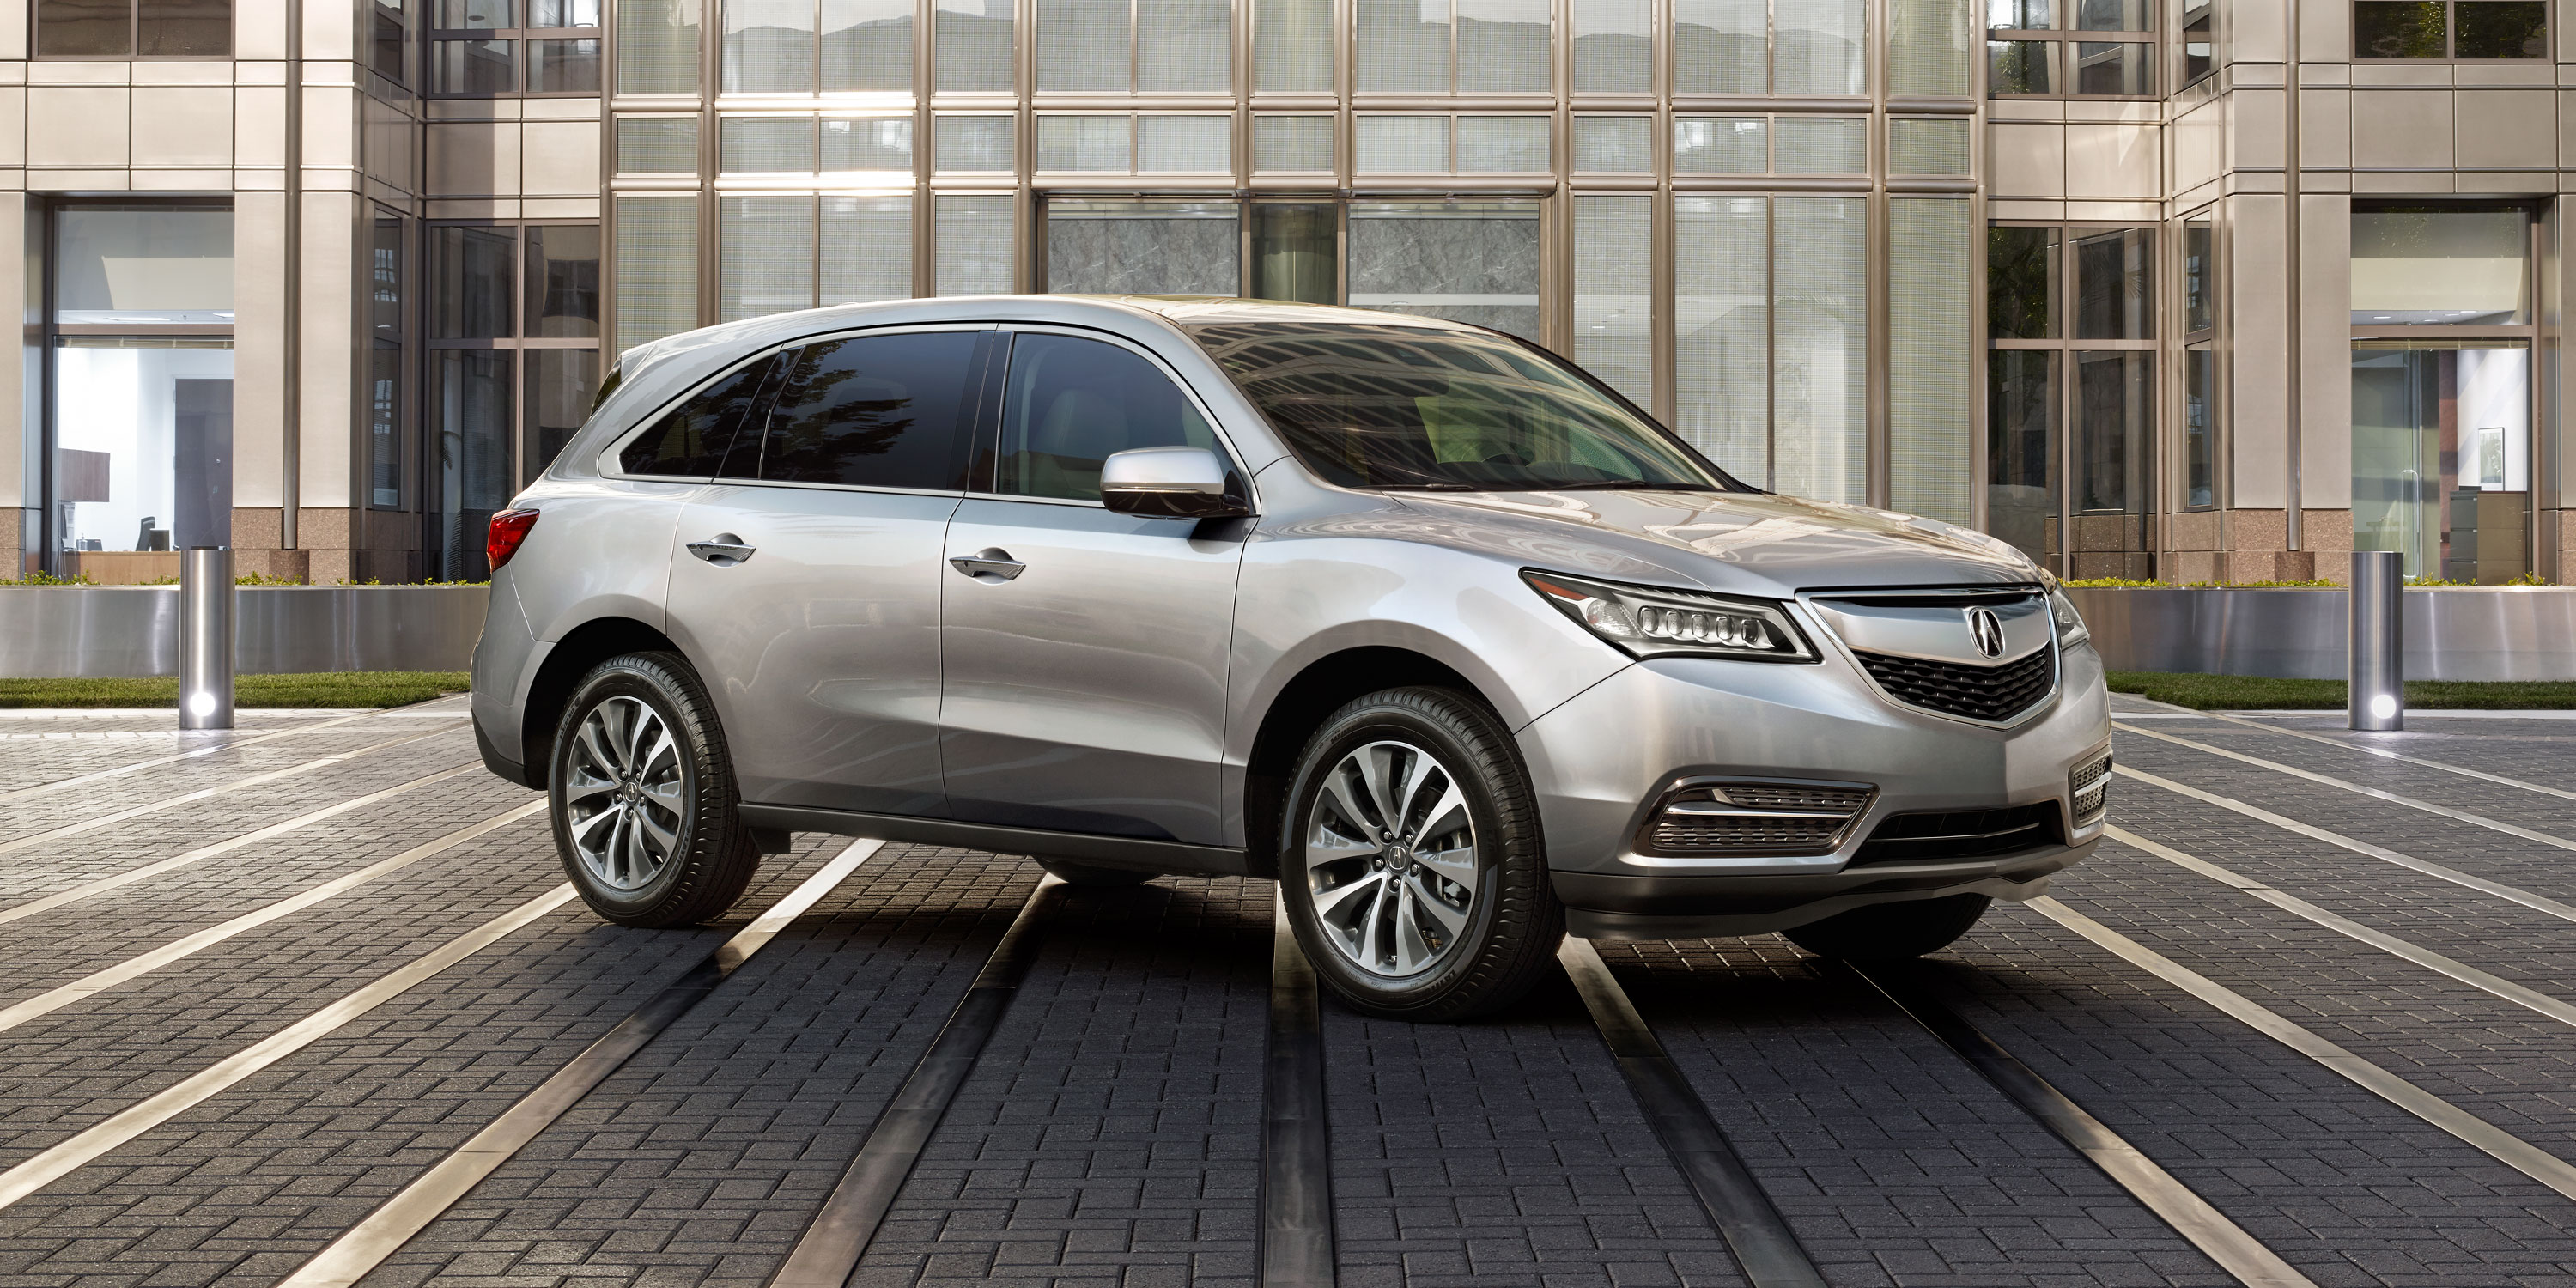 acura mdx Wallpapers hd cool